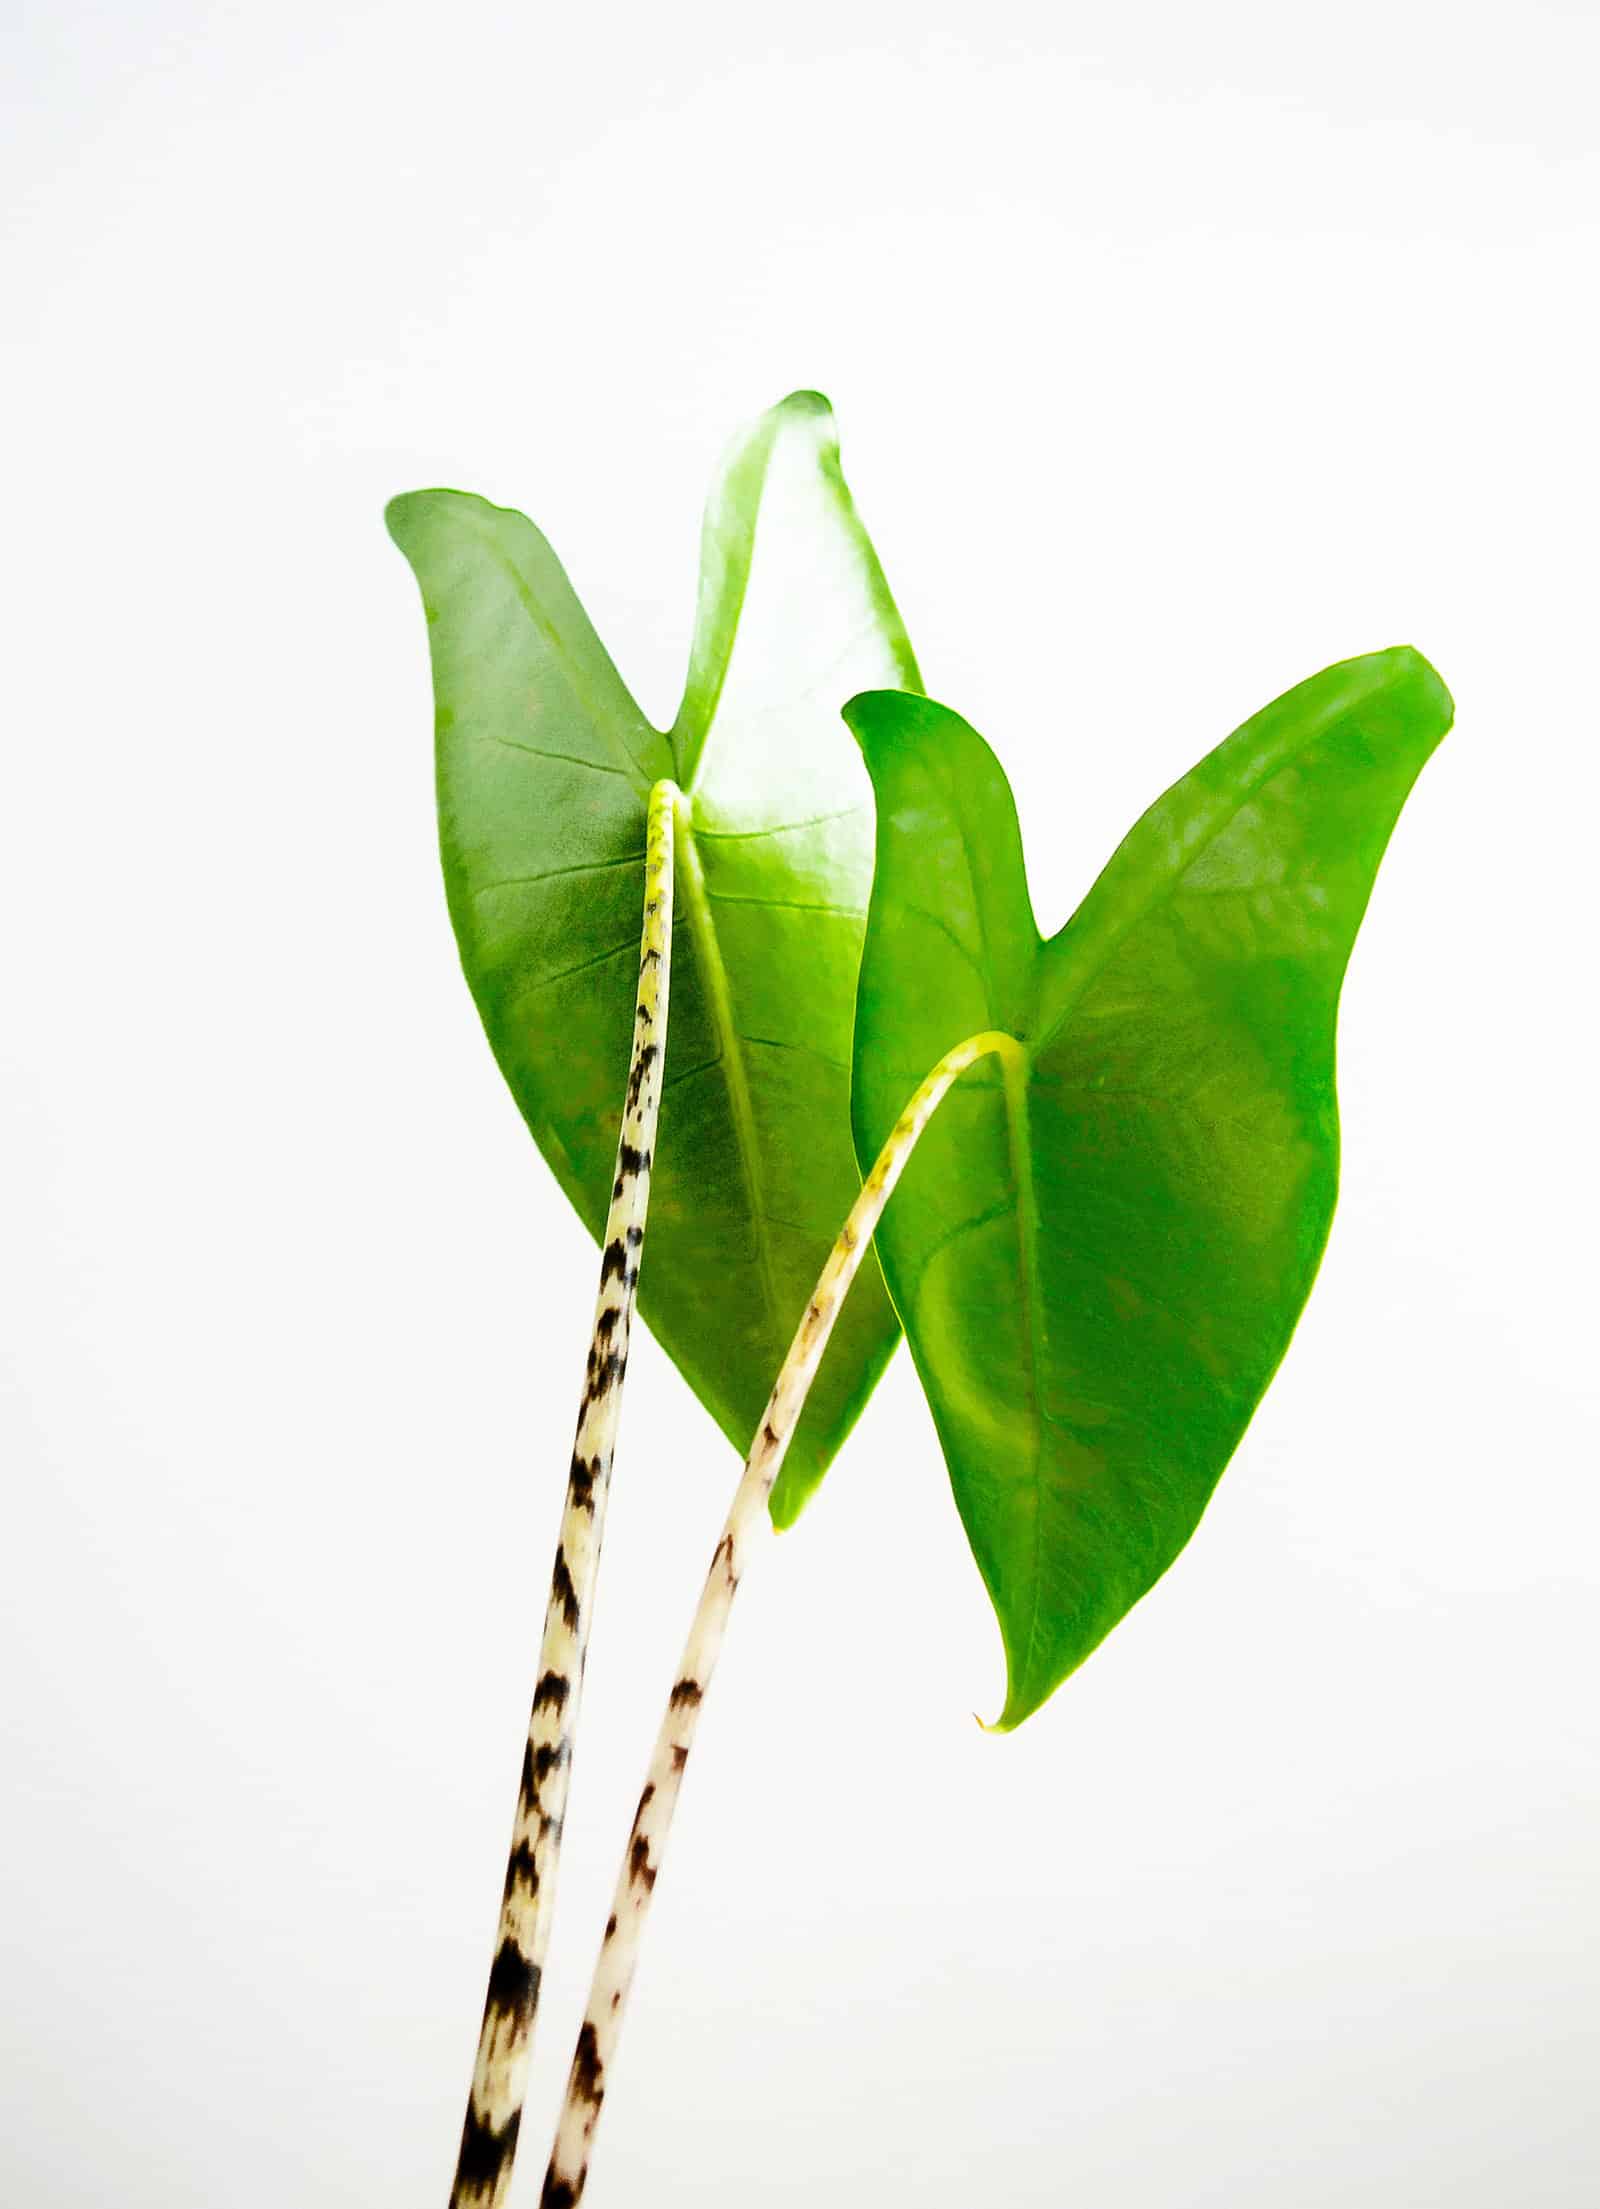 View of two glossy heart-shaped Alocasia zebrina leaves from behind, shot against a white background